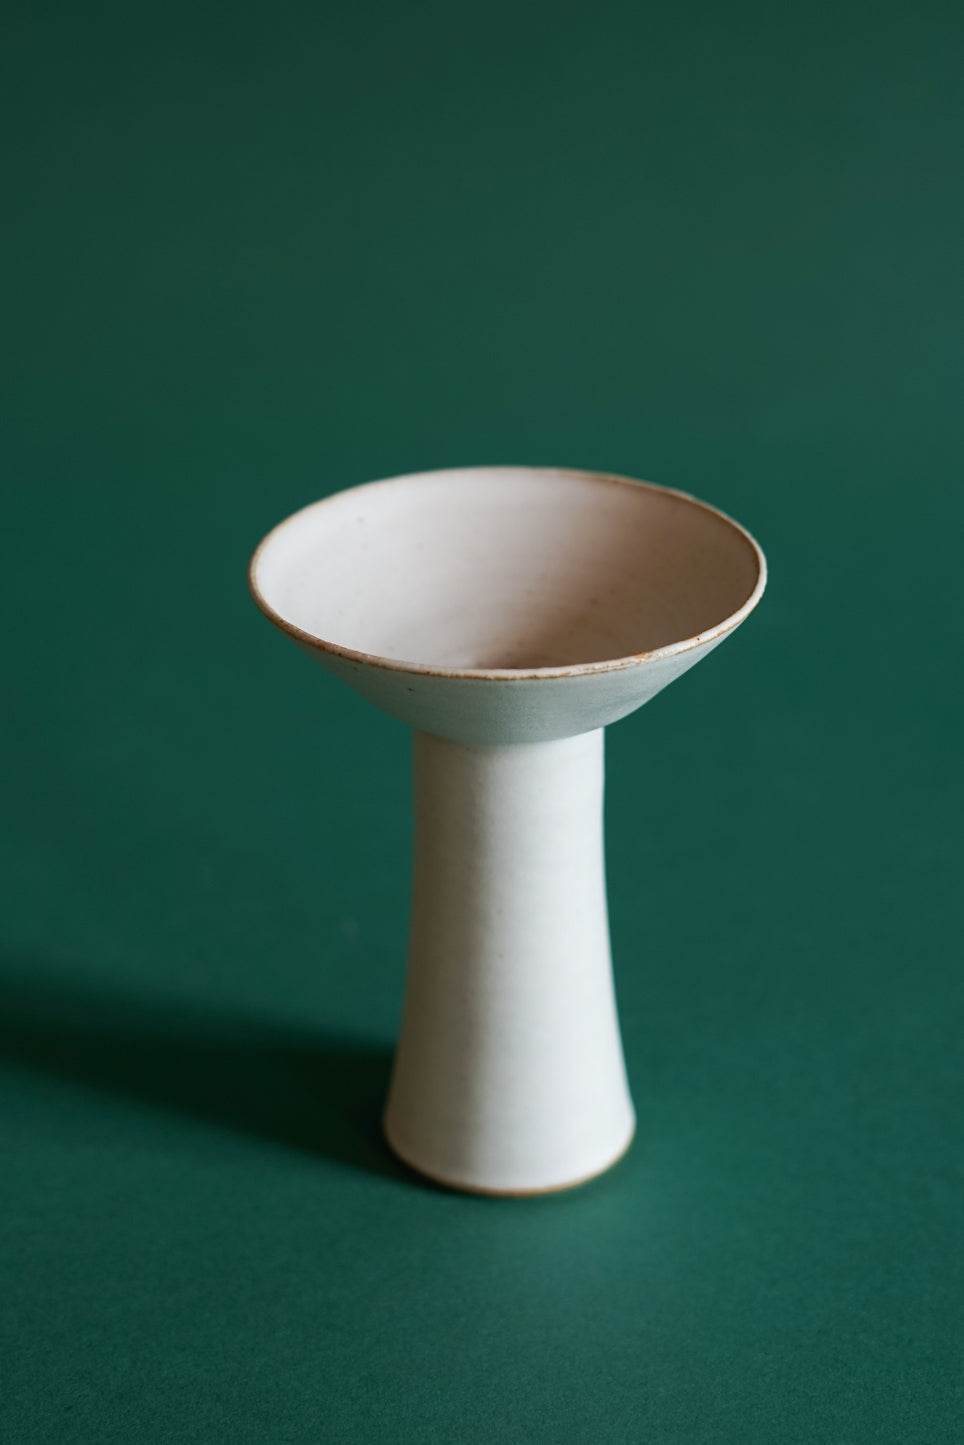 Cara Guthrie has created a collection of Midsummer Candlesticks for Bard. Pictured here is the medium size in a white chalk glaze.